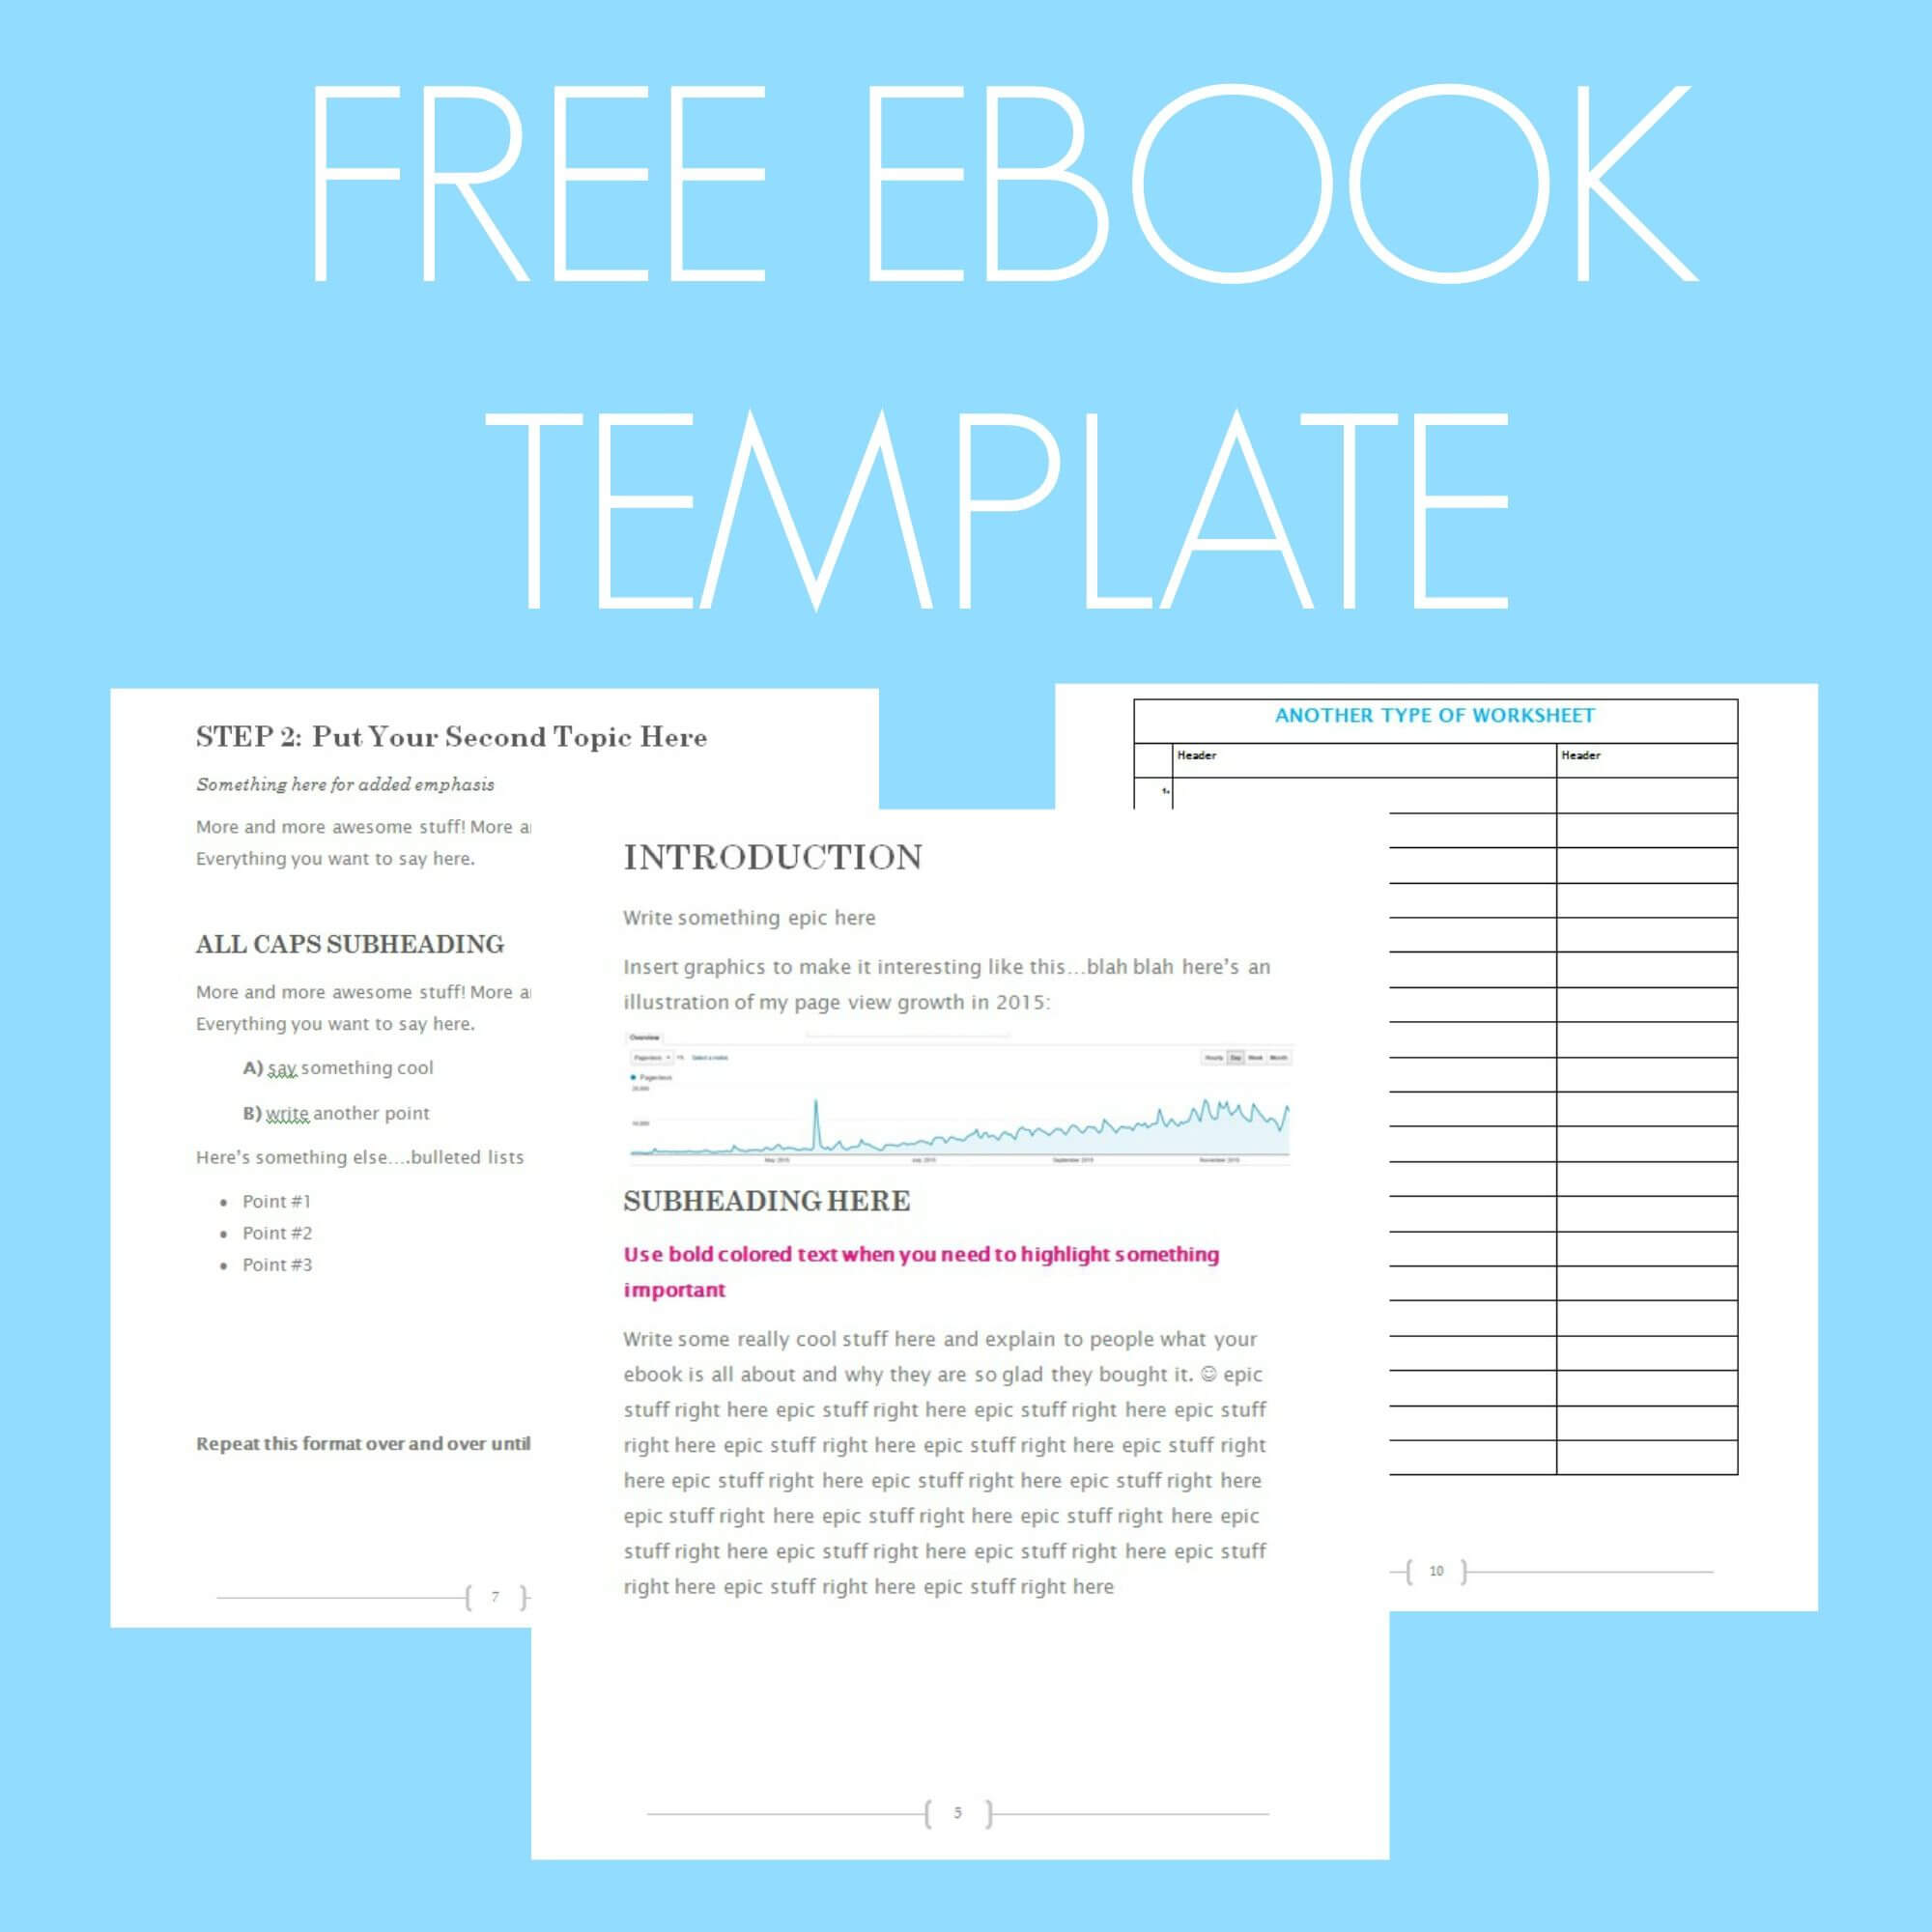 Free Ebook Template – Preformatted Word Document | Writing Intended For Microsoft Word Table Of Contents Template